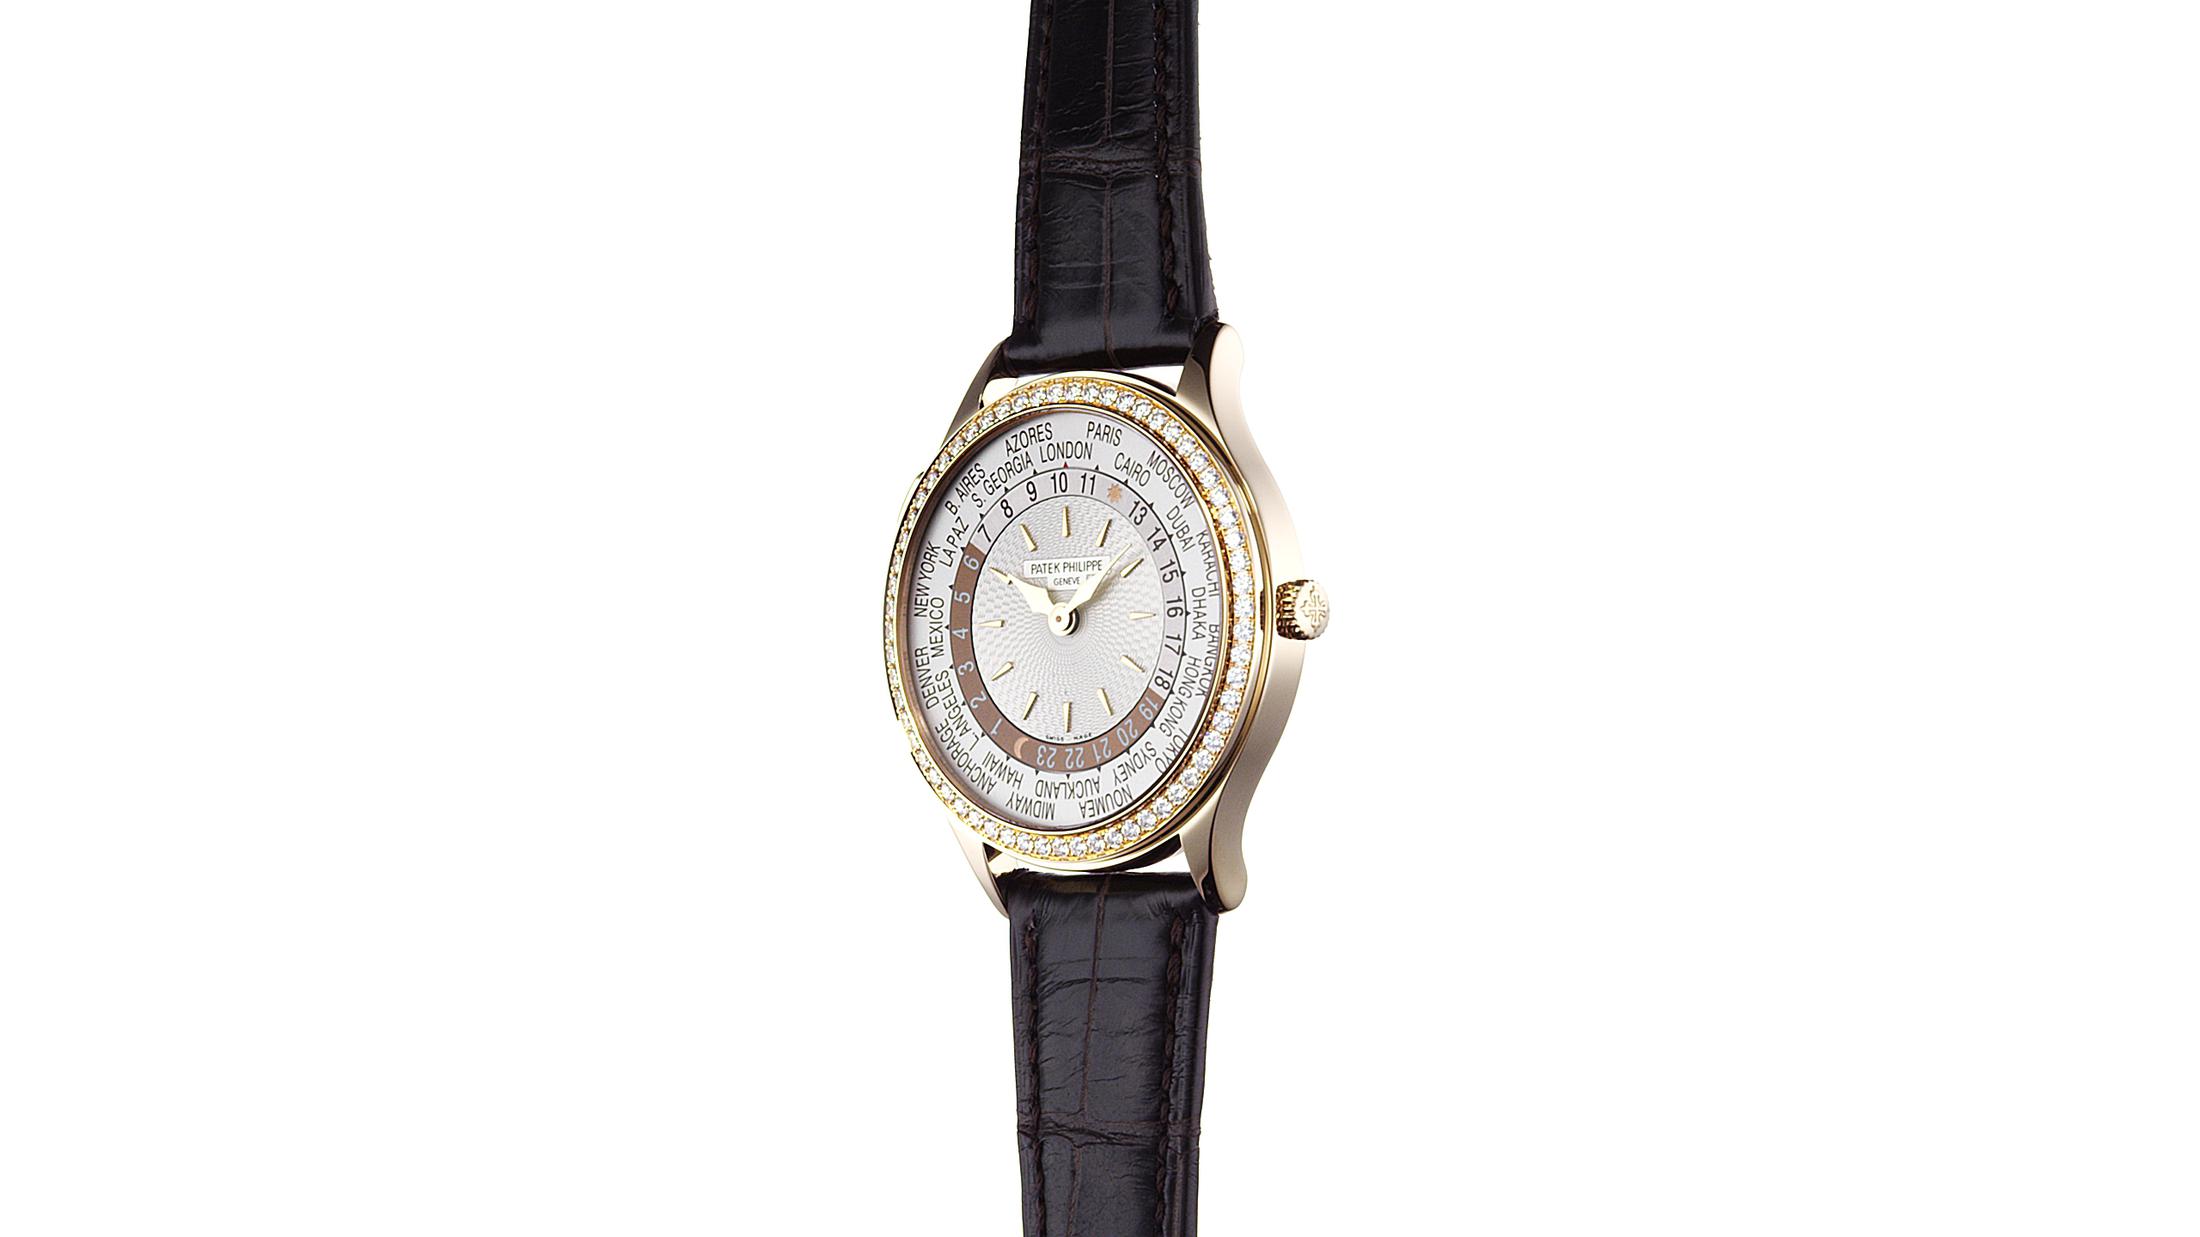 Patek Philippe Pre-Owned ComplicationsPatek Philippe Ladies World Time New York Edition White Gold 7130G-015